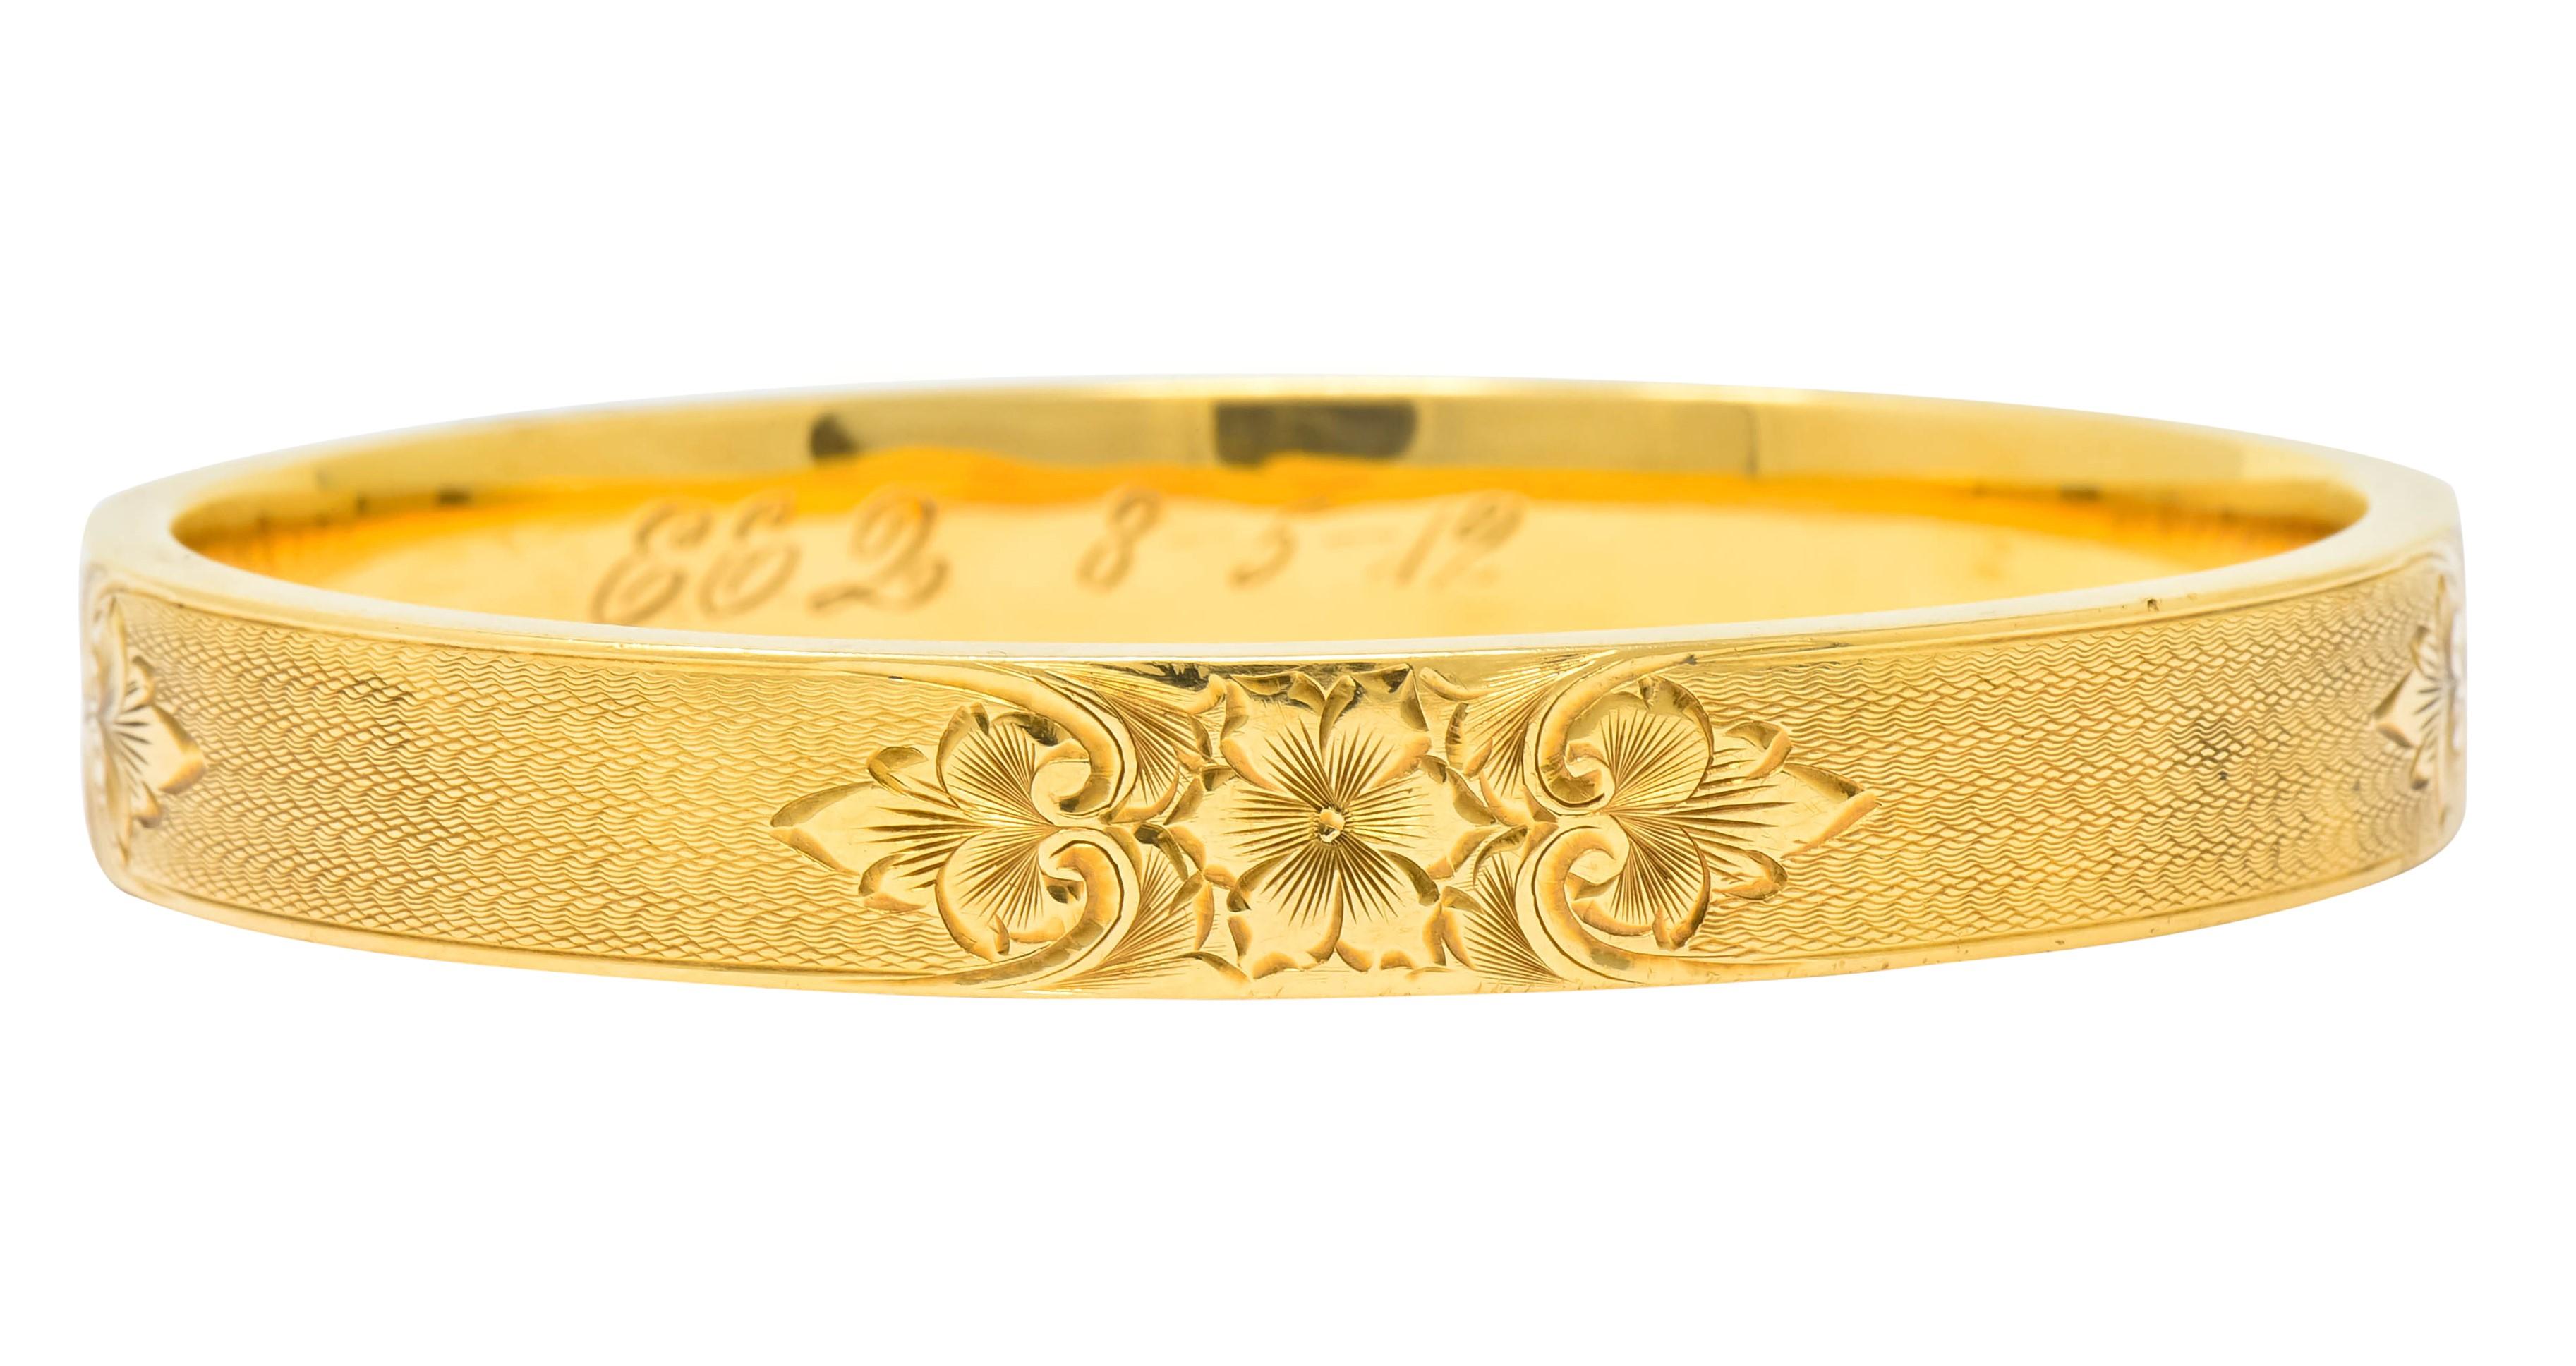 Bangle style bracelet with four deeply engraved stations depicting a floral motif flanked by large stylized leaves

Stations separated by a mesmerizing etched scallop motif finish

With dated inscription, maker's mark, and stamped 14k for 14 karat